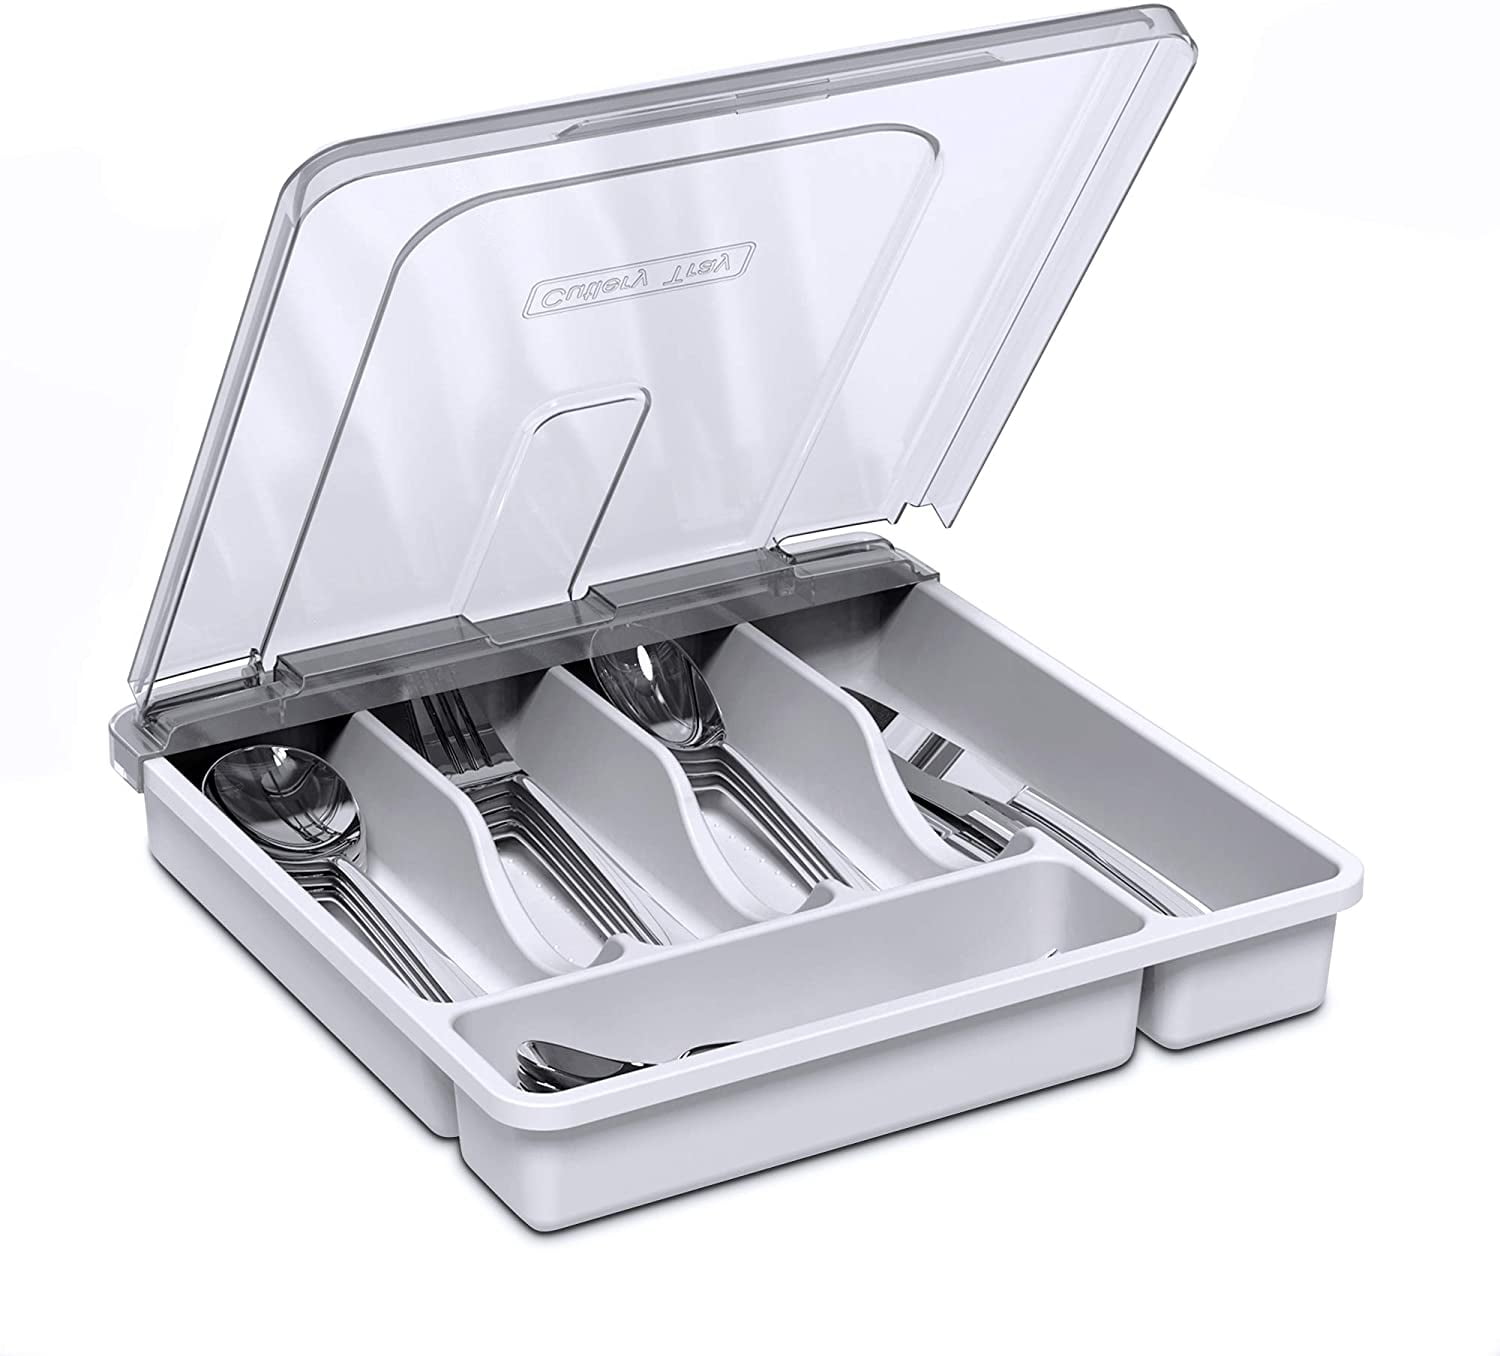 Flatware Plastic Tray With Lid,Kitchen Cutlery And Utensil Drawer Organiser Whit 